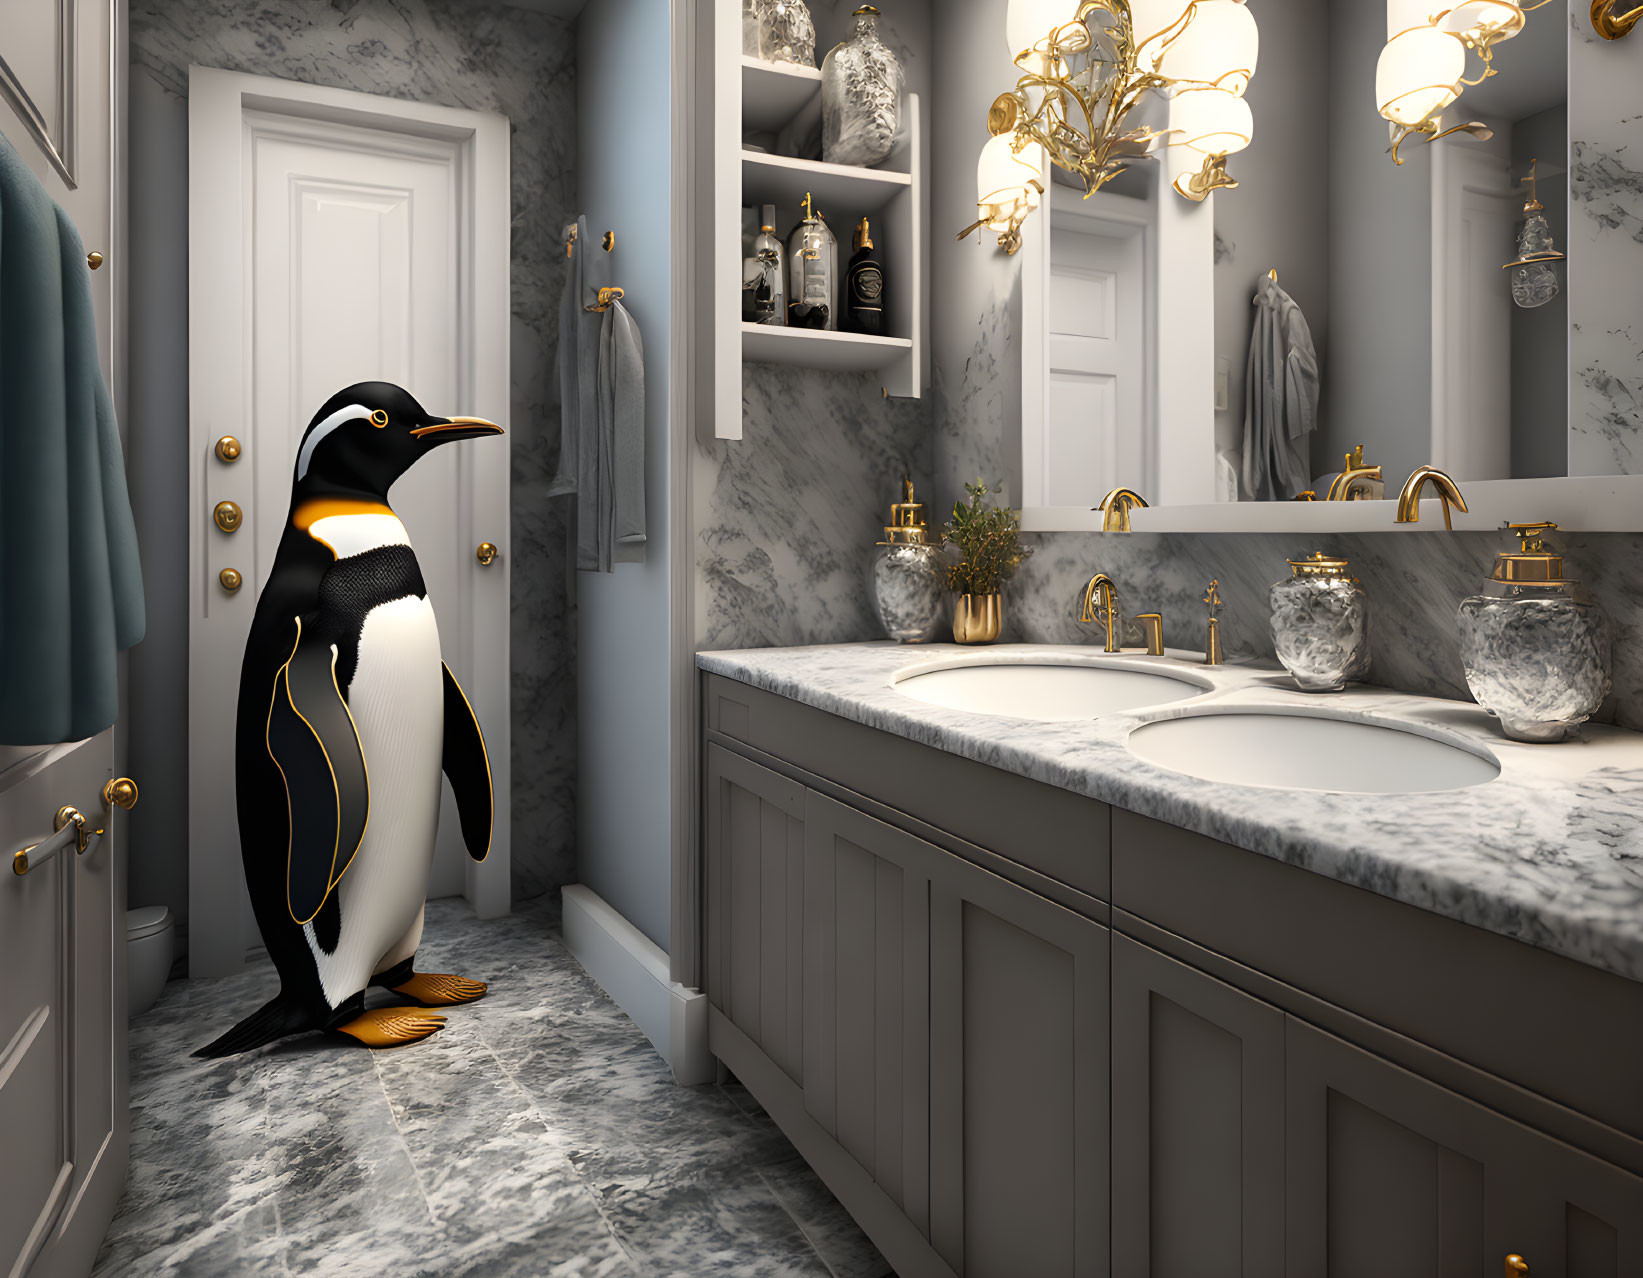 Luxurious bathroom with marble countertops, gold fixtures, and elegant decor featuring a penguin